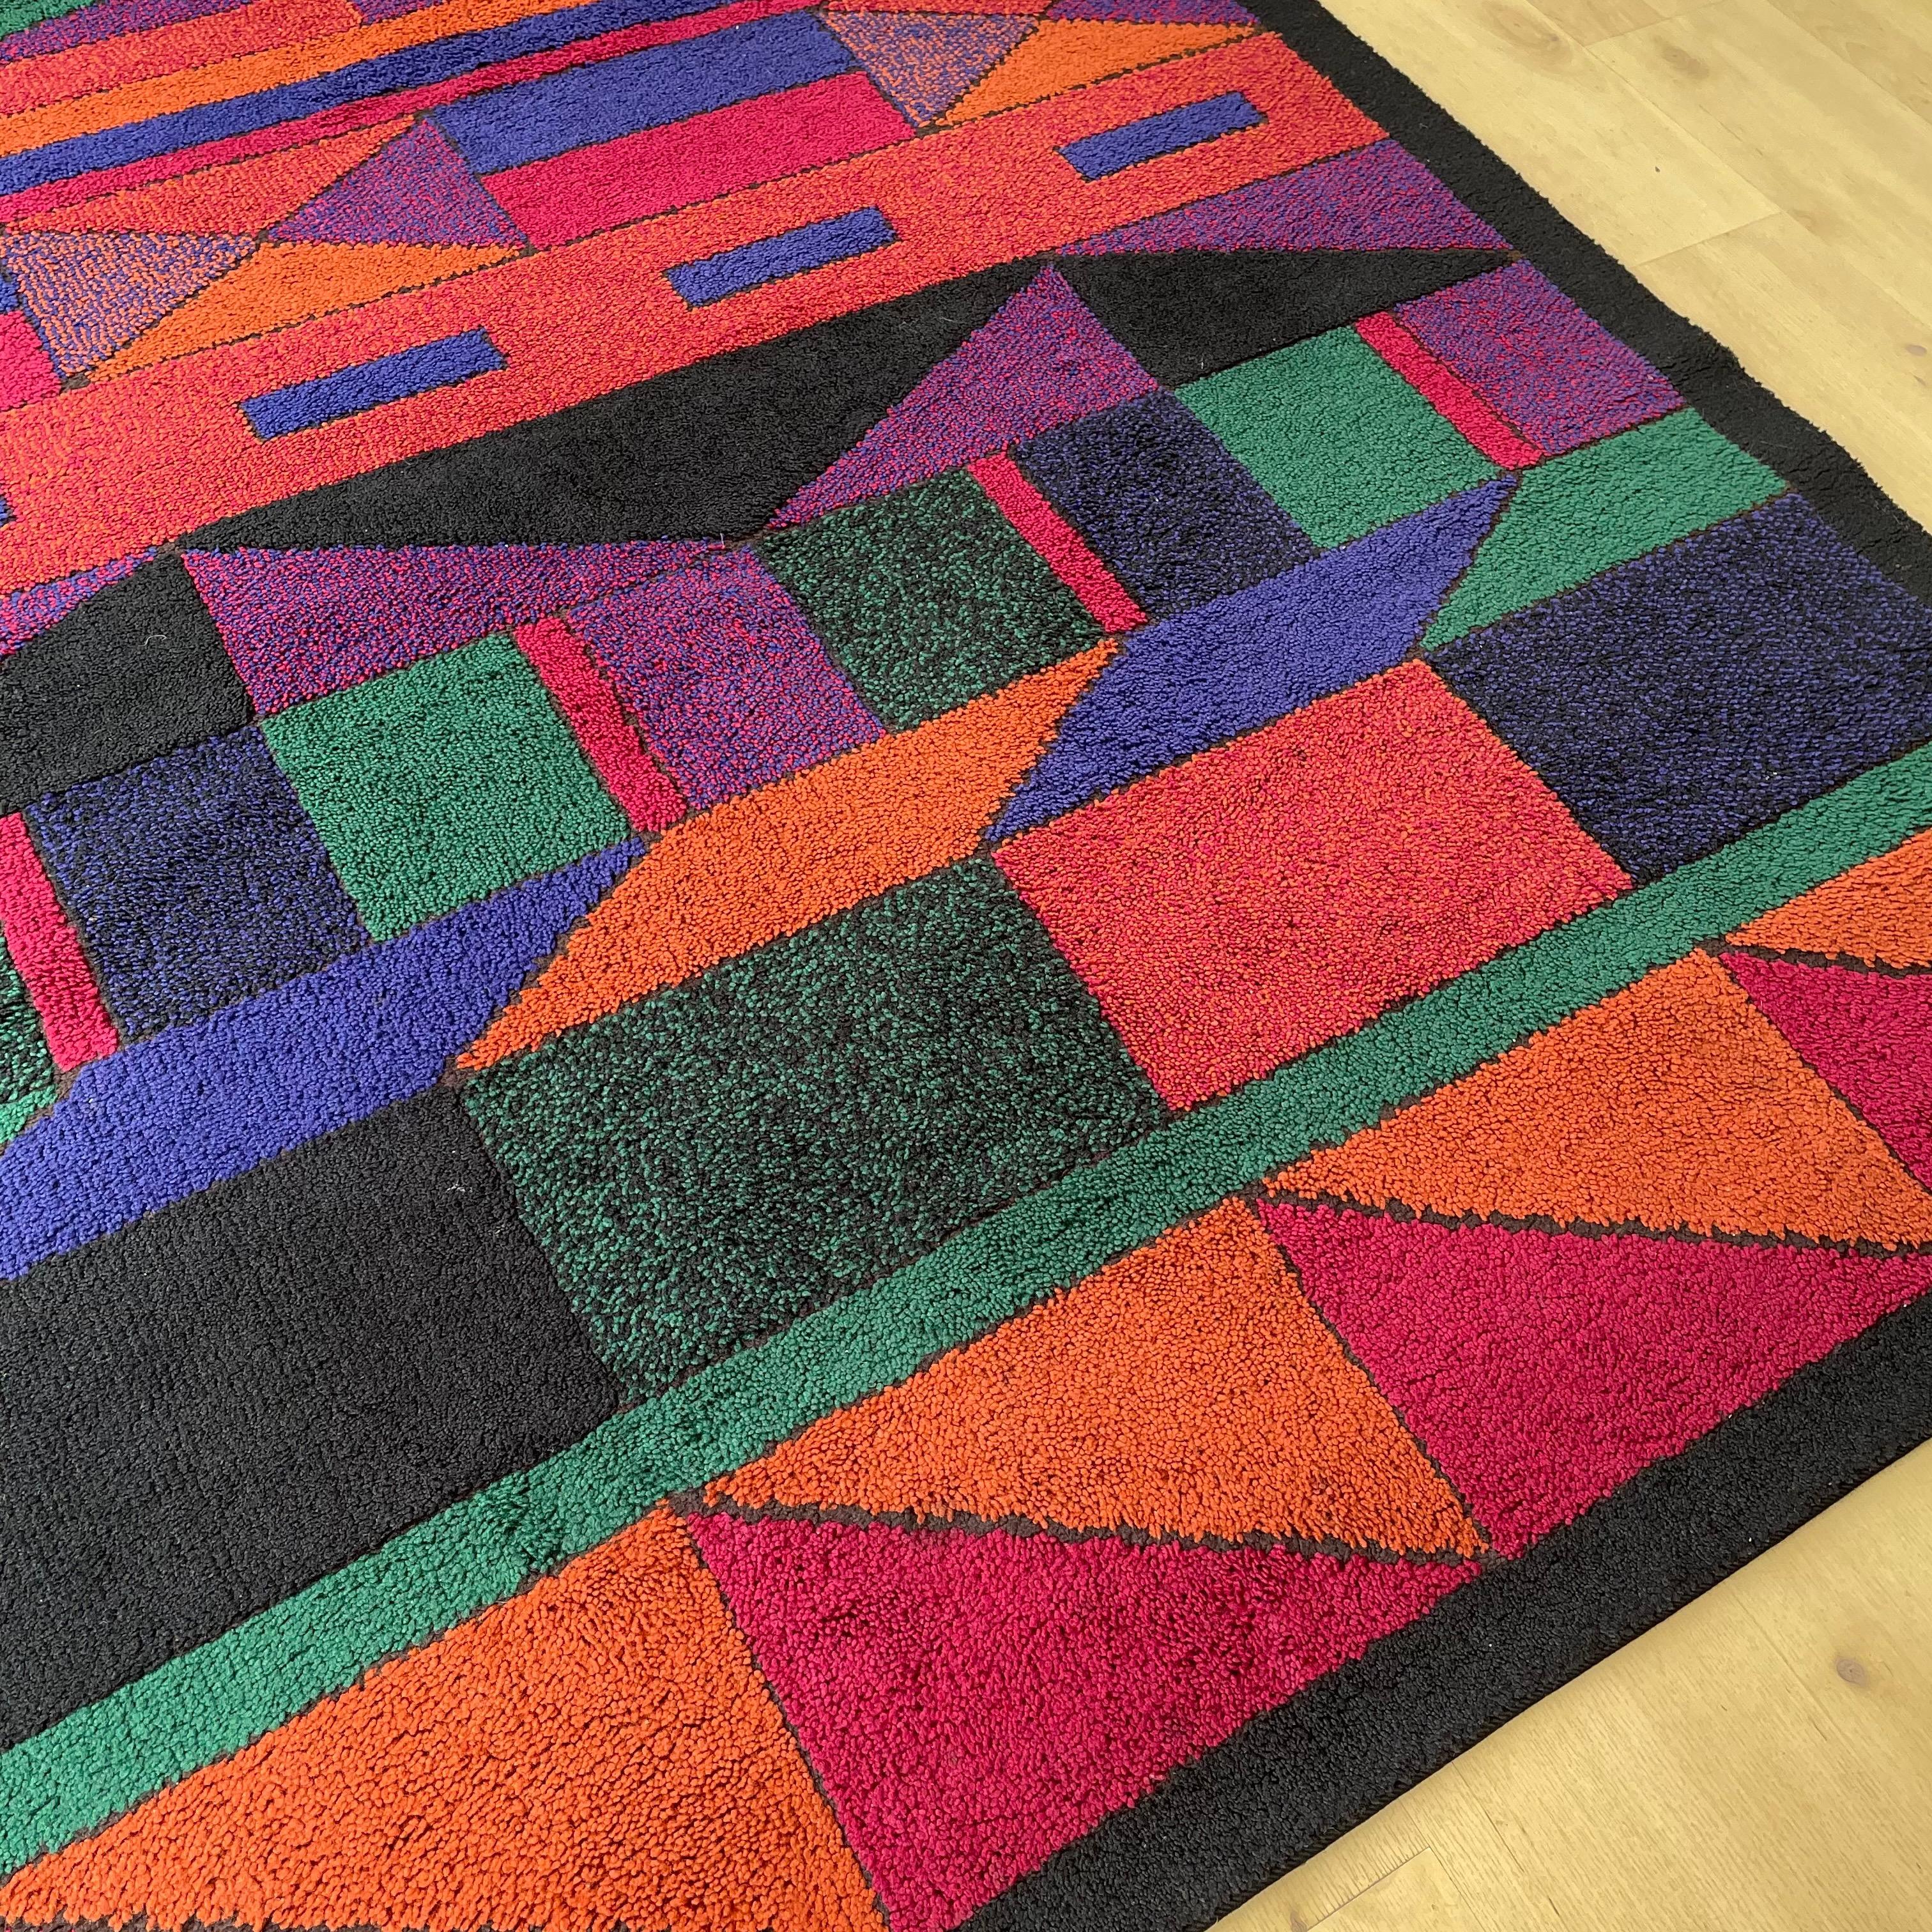 20th Century Psychedelic Memphis Style abstract Rug Carpet by Atrium Tefzet, Germany 1980s For Sale